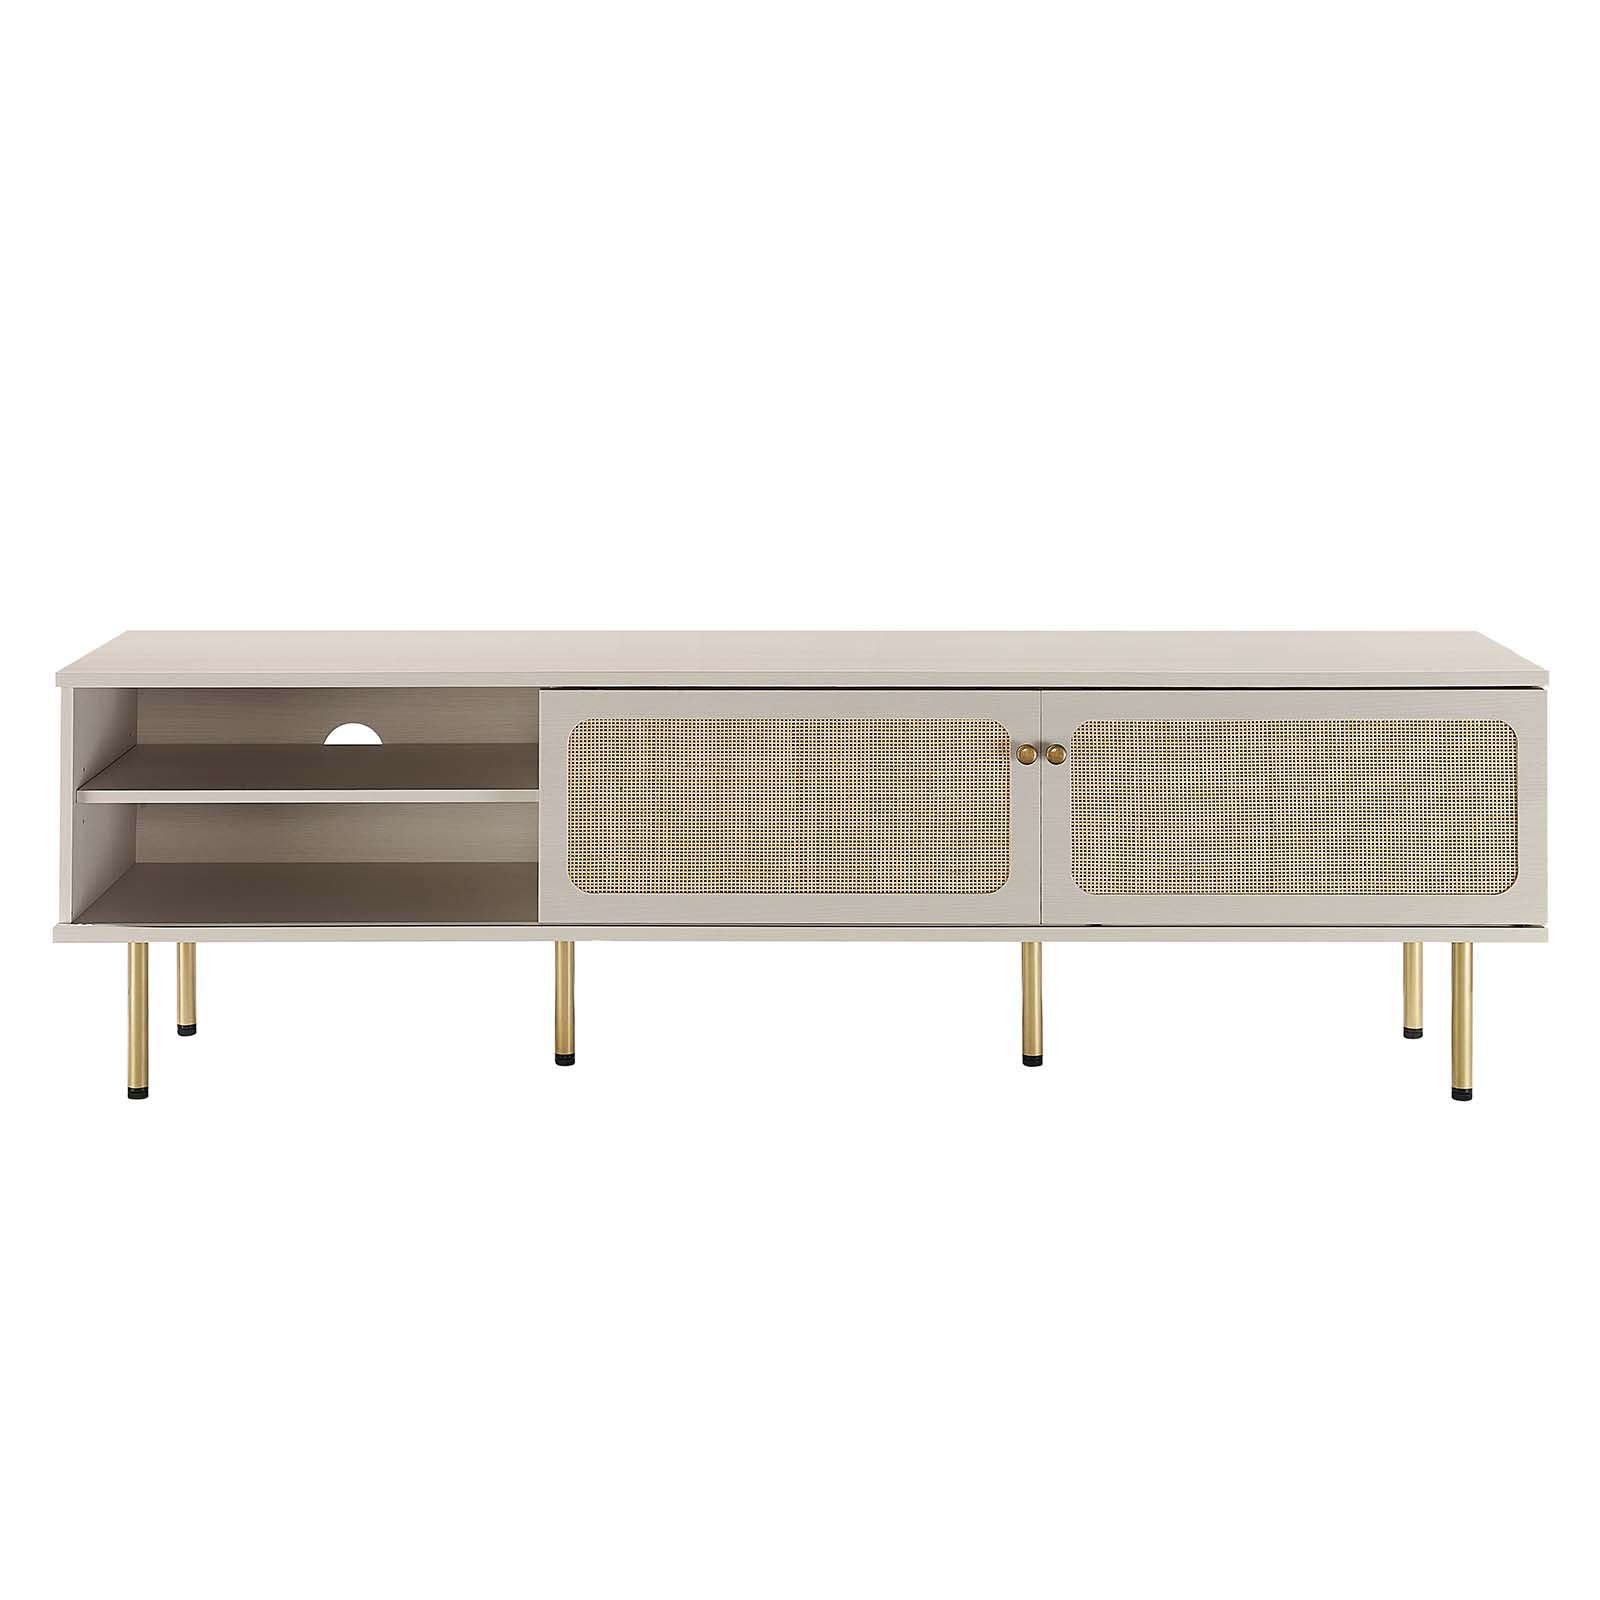 Cambria 70" TV Stand - East Shore Modern Home Furnishings